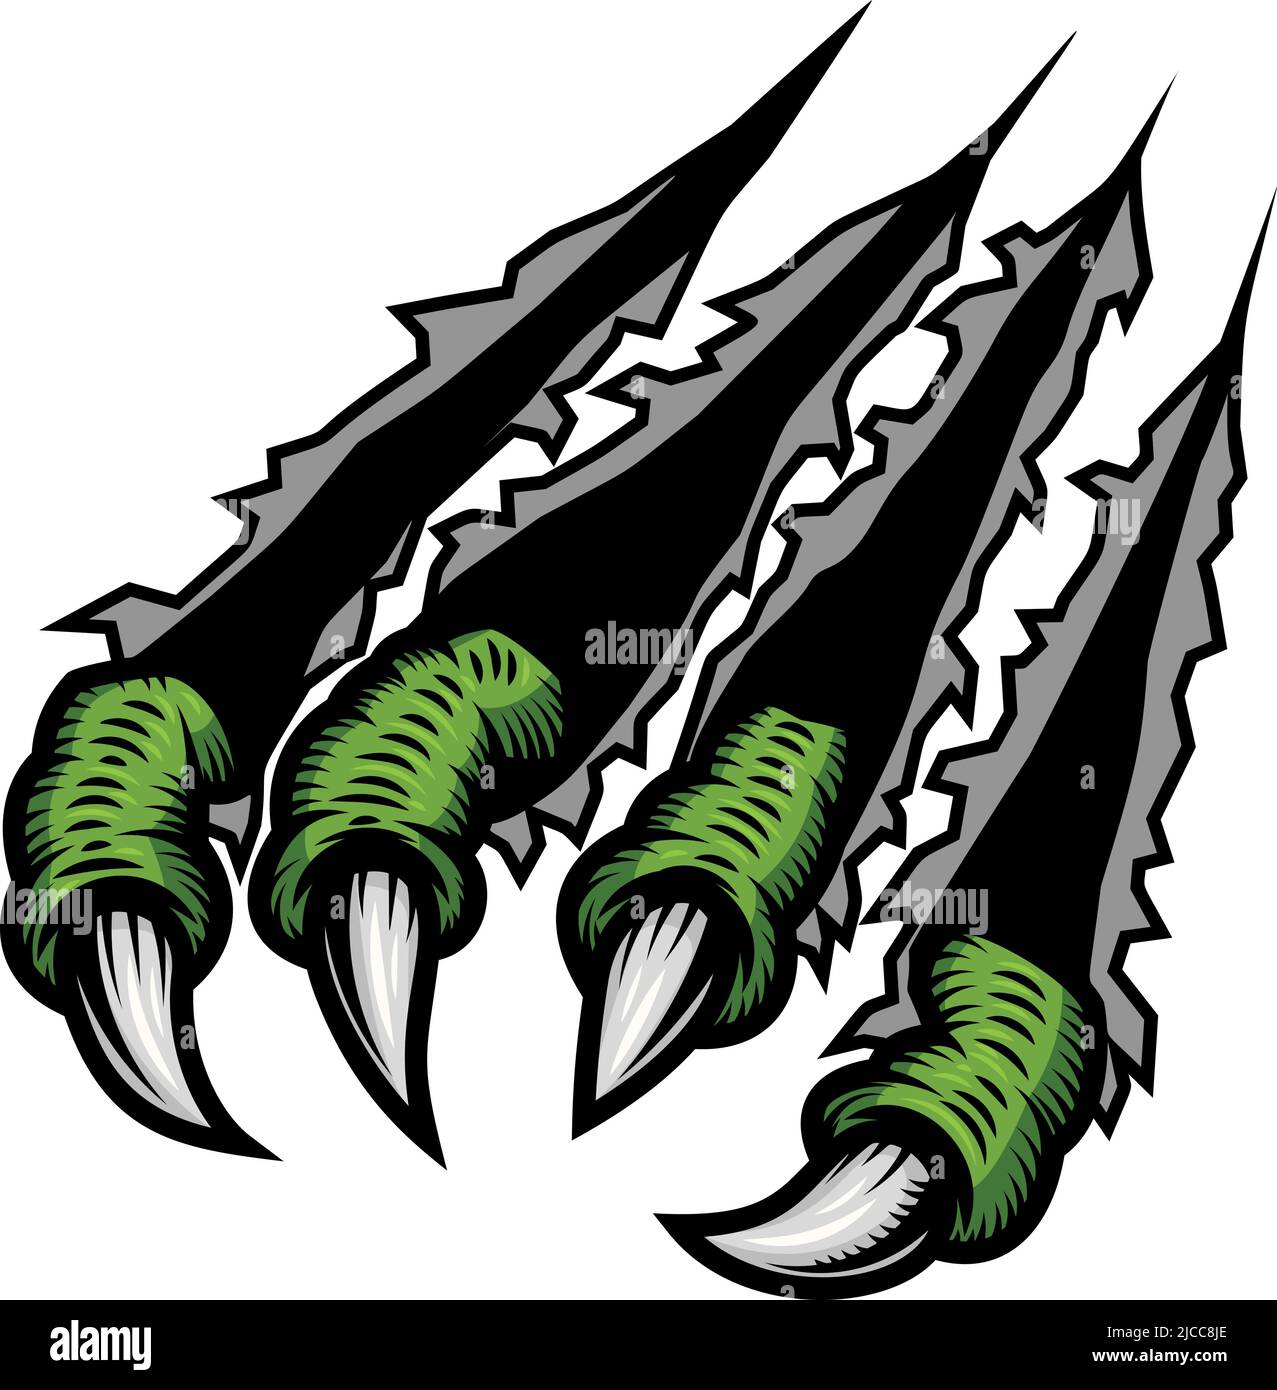 Monster claws scratching background. For poster, t shirt, decoration ...